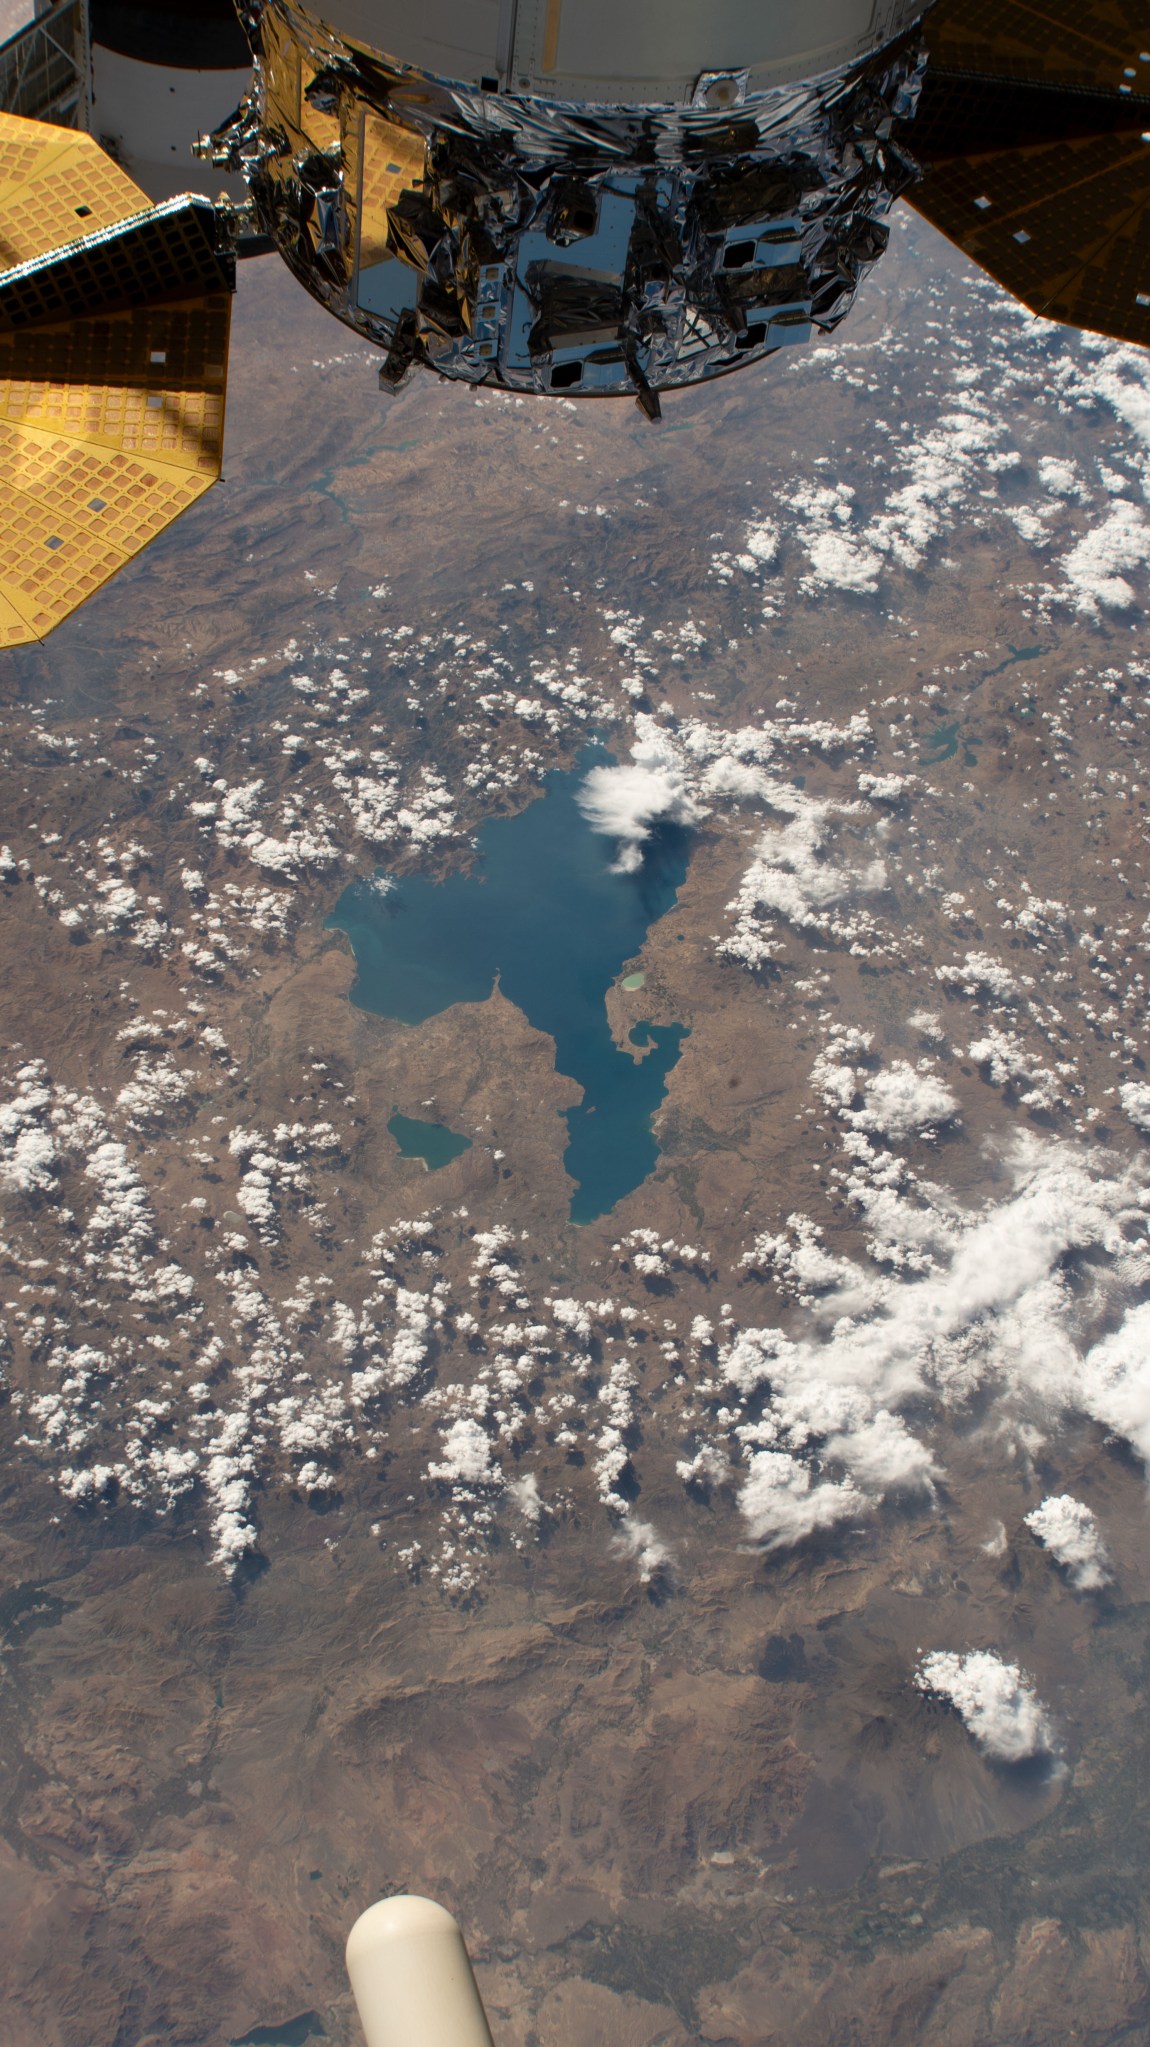 Two lakes in Turkey, the larger Van Lake and the smaller Erçek Lake, are pictured from the International Space Station as it orbited 259 miles above the Eurasian region near the Caspian Sea.